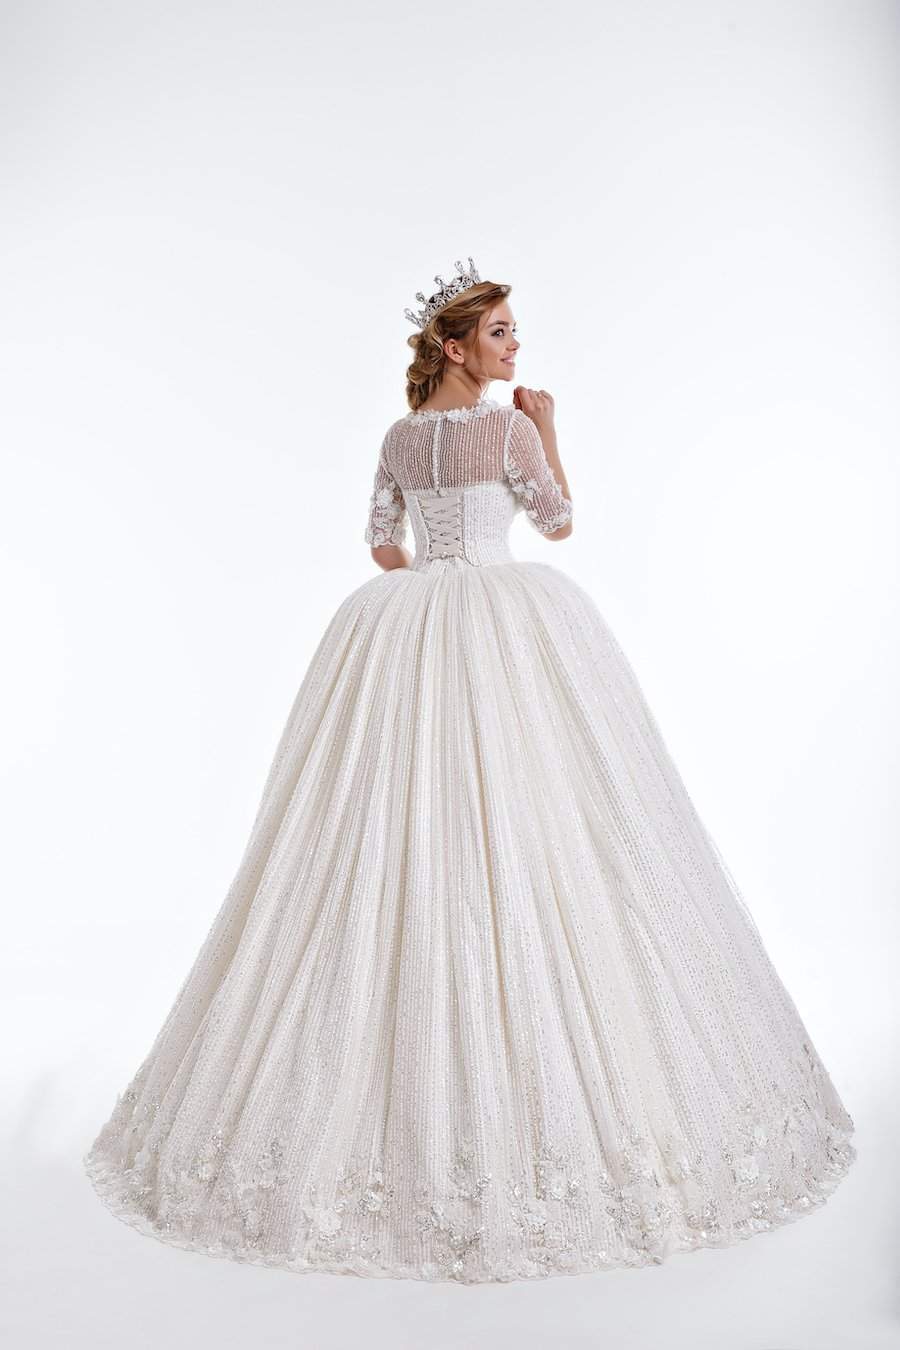 White Ball Gown Dress-Ball Gown,Classic Elegant Gowns,Royal Wedding Dresses,White